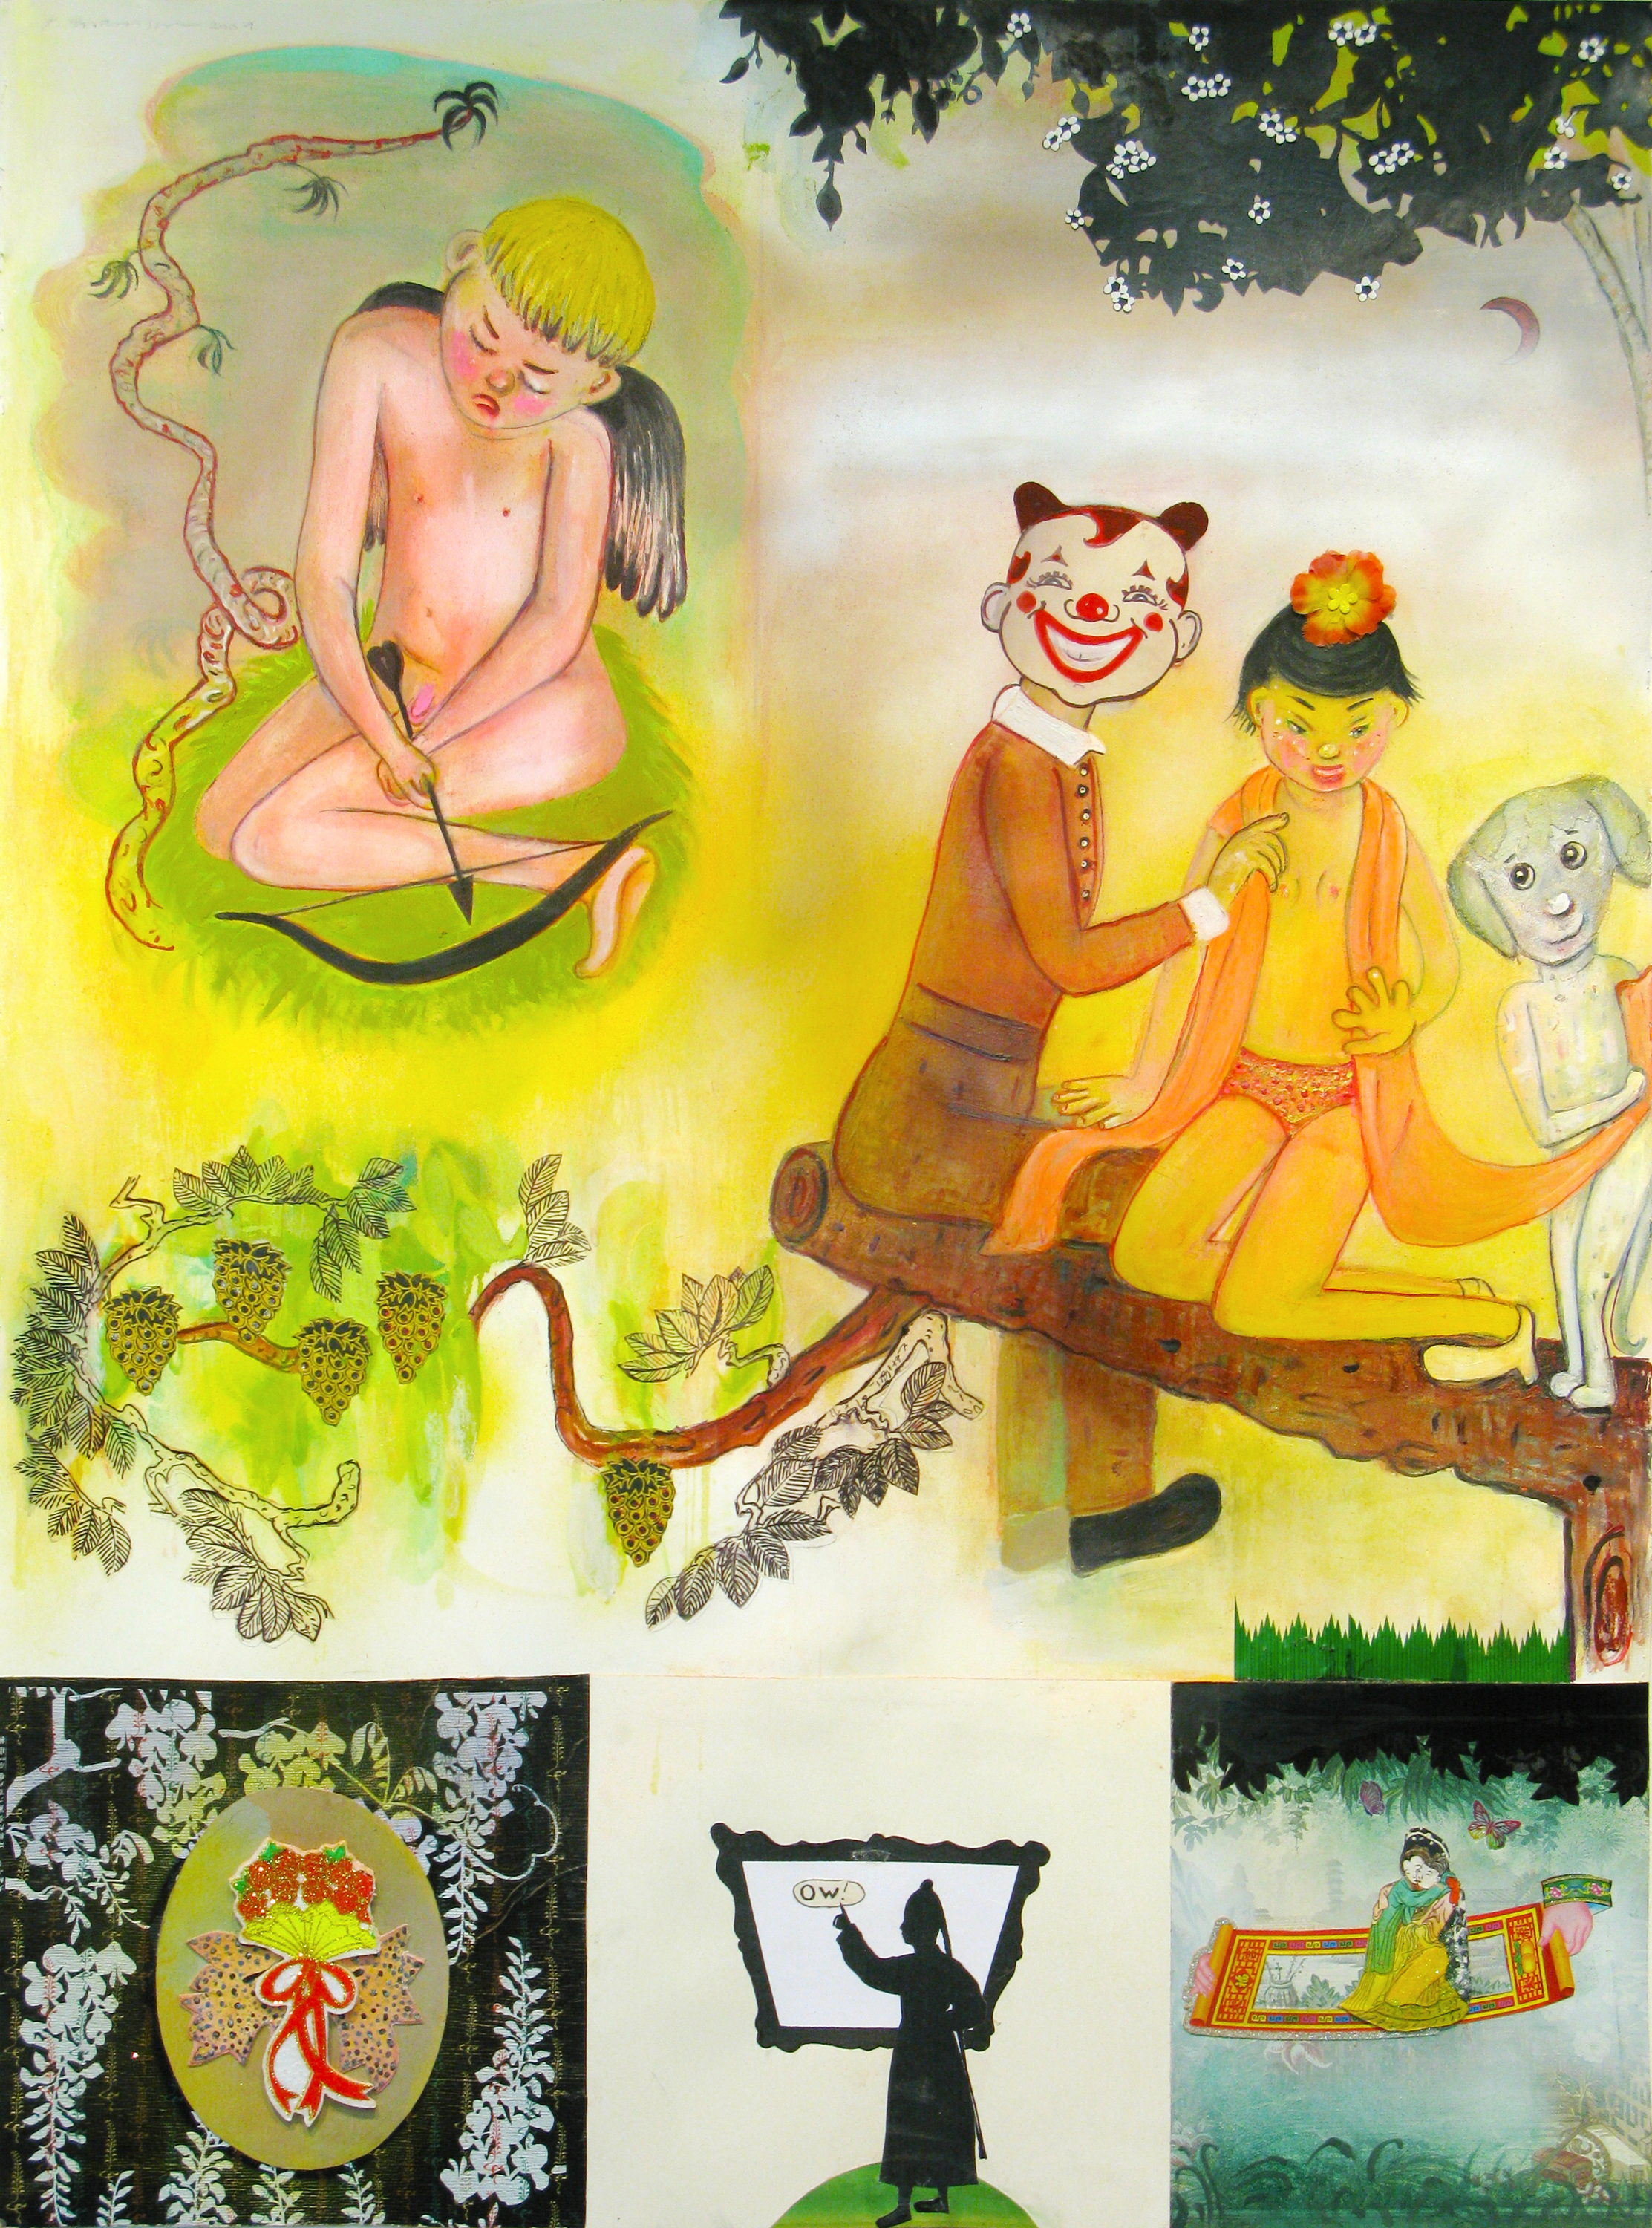 Cupid's Tale of Woe, 54" × 40.5", mixed media collage drawing, 2009